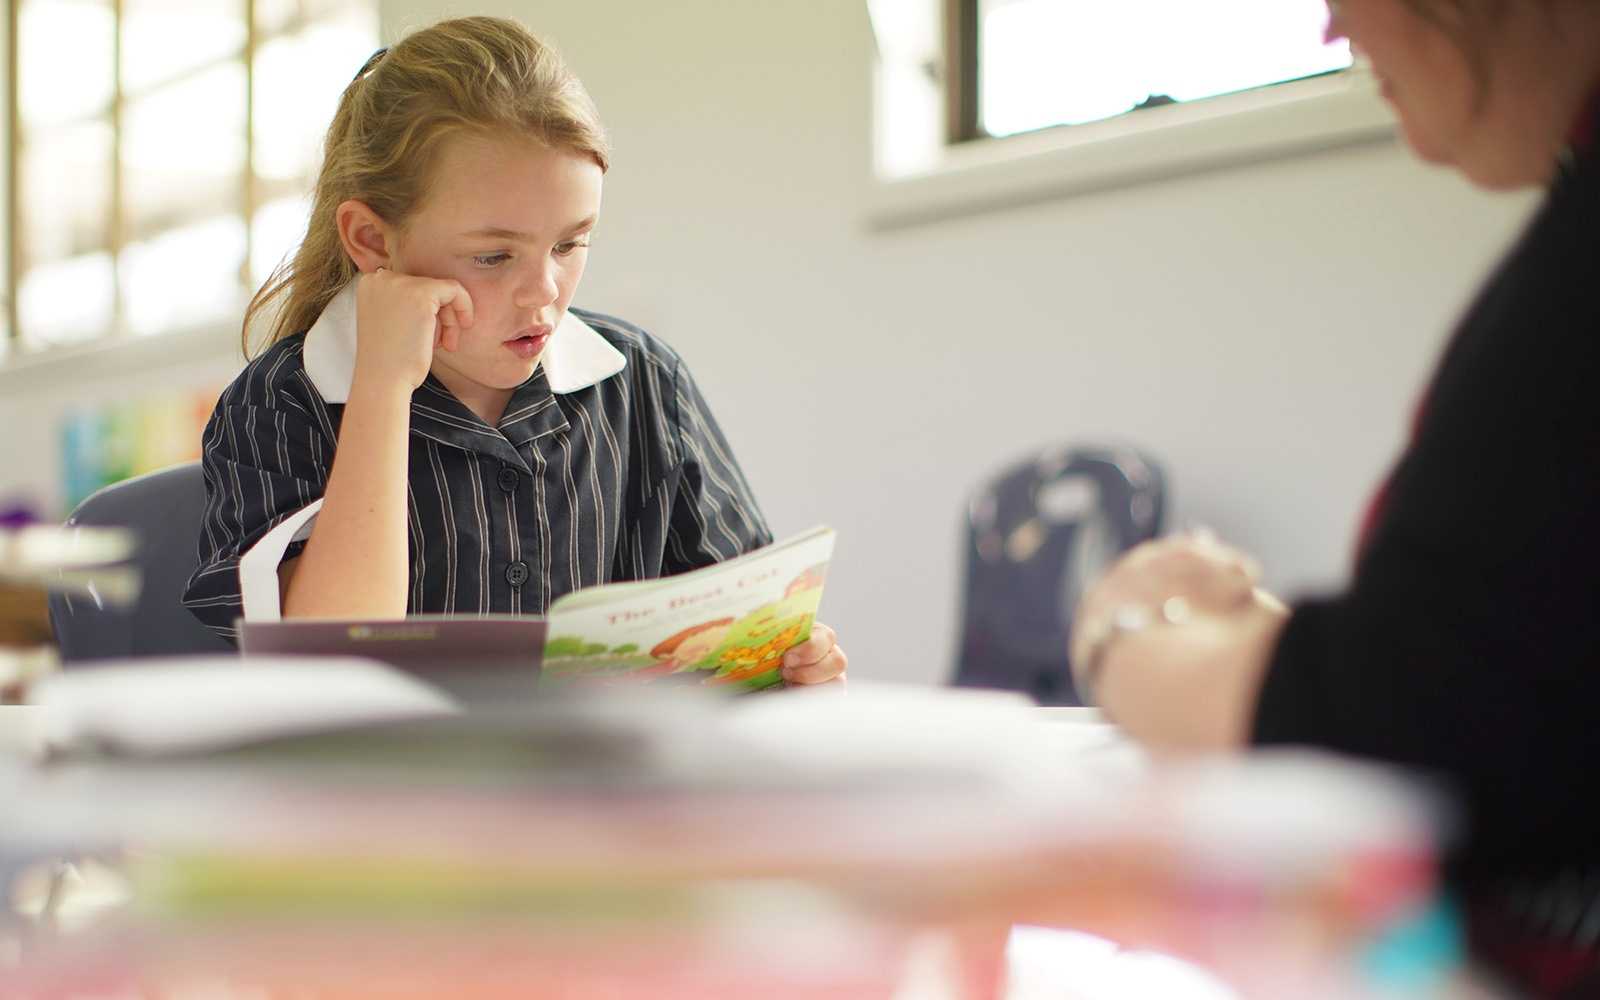 ACC Burnie female student intently reading book in classroom